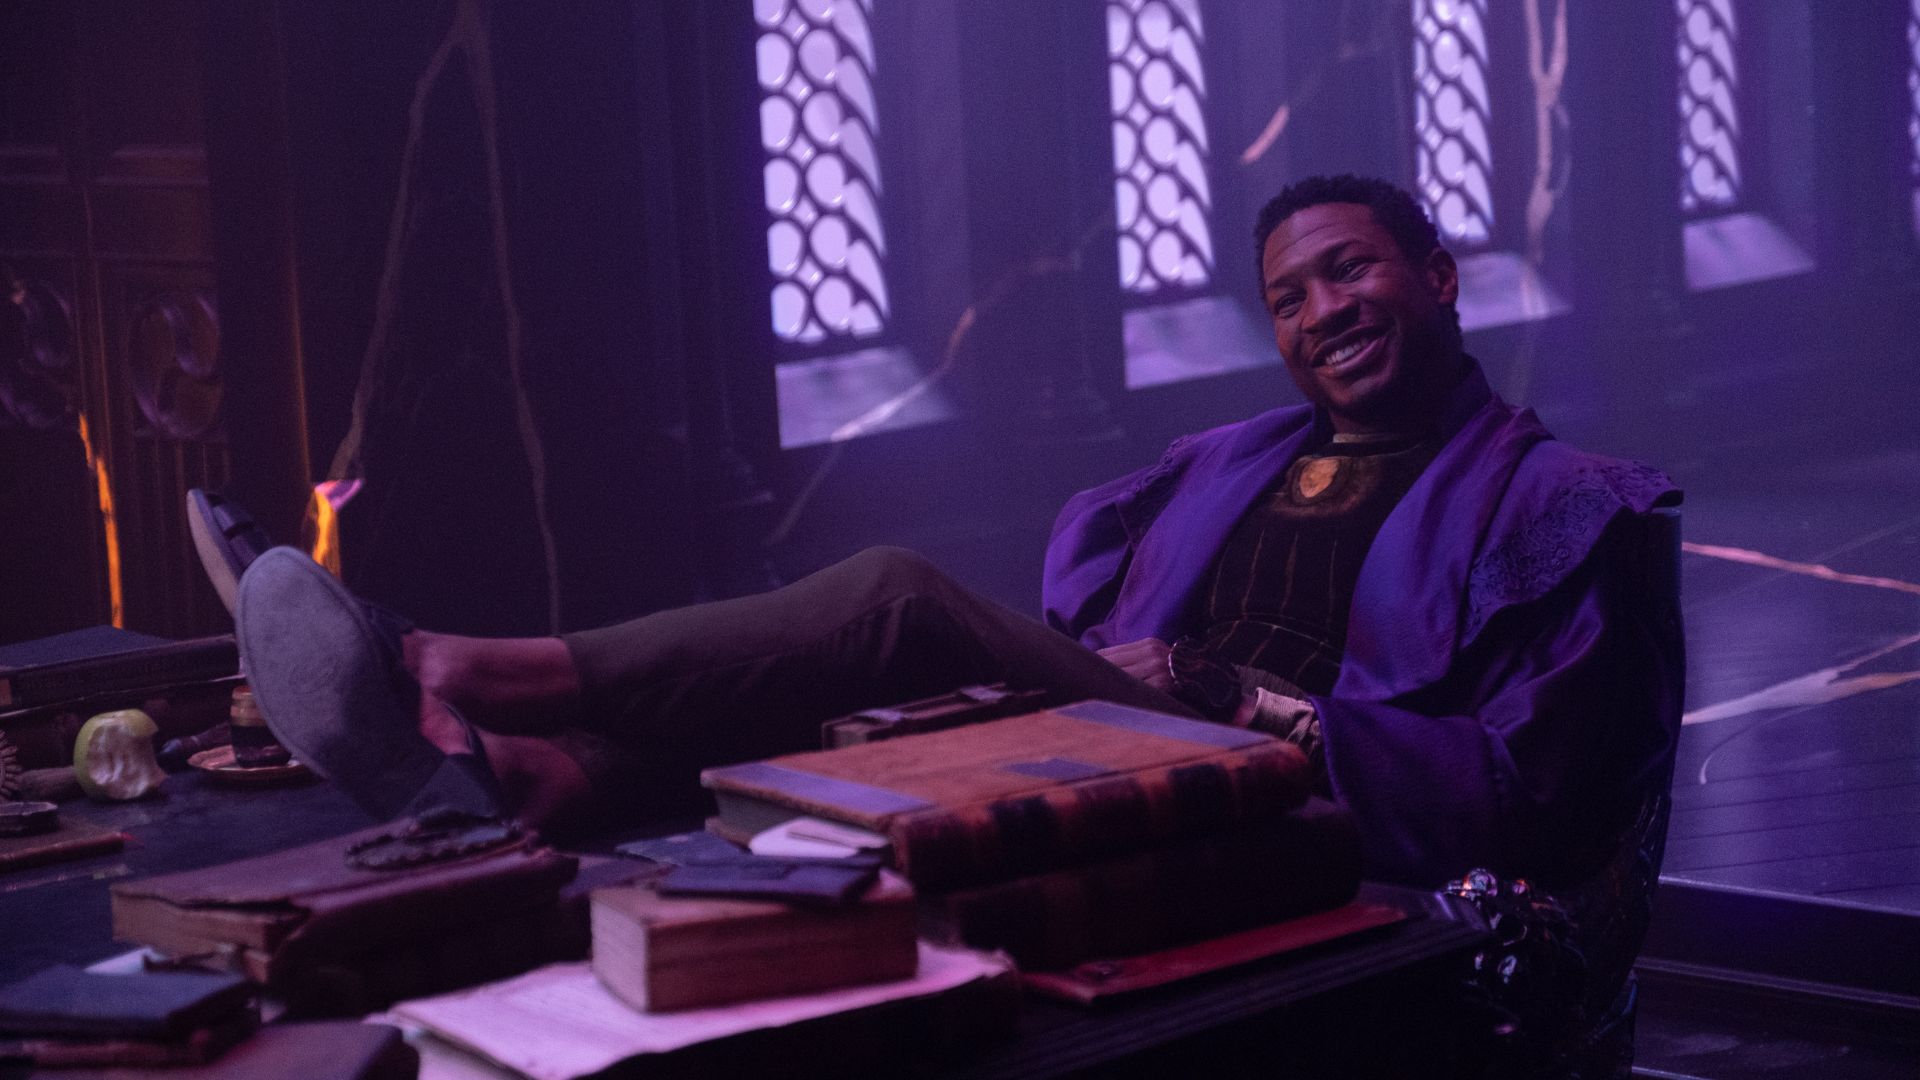 He Who Remains smiles as he puts his feet on a table in Loki episode 6